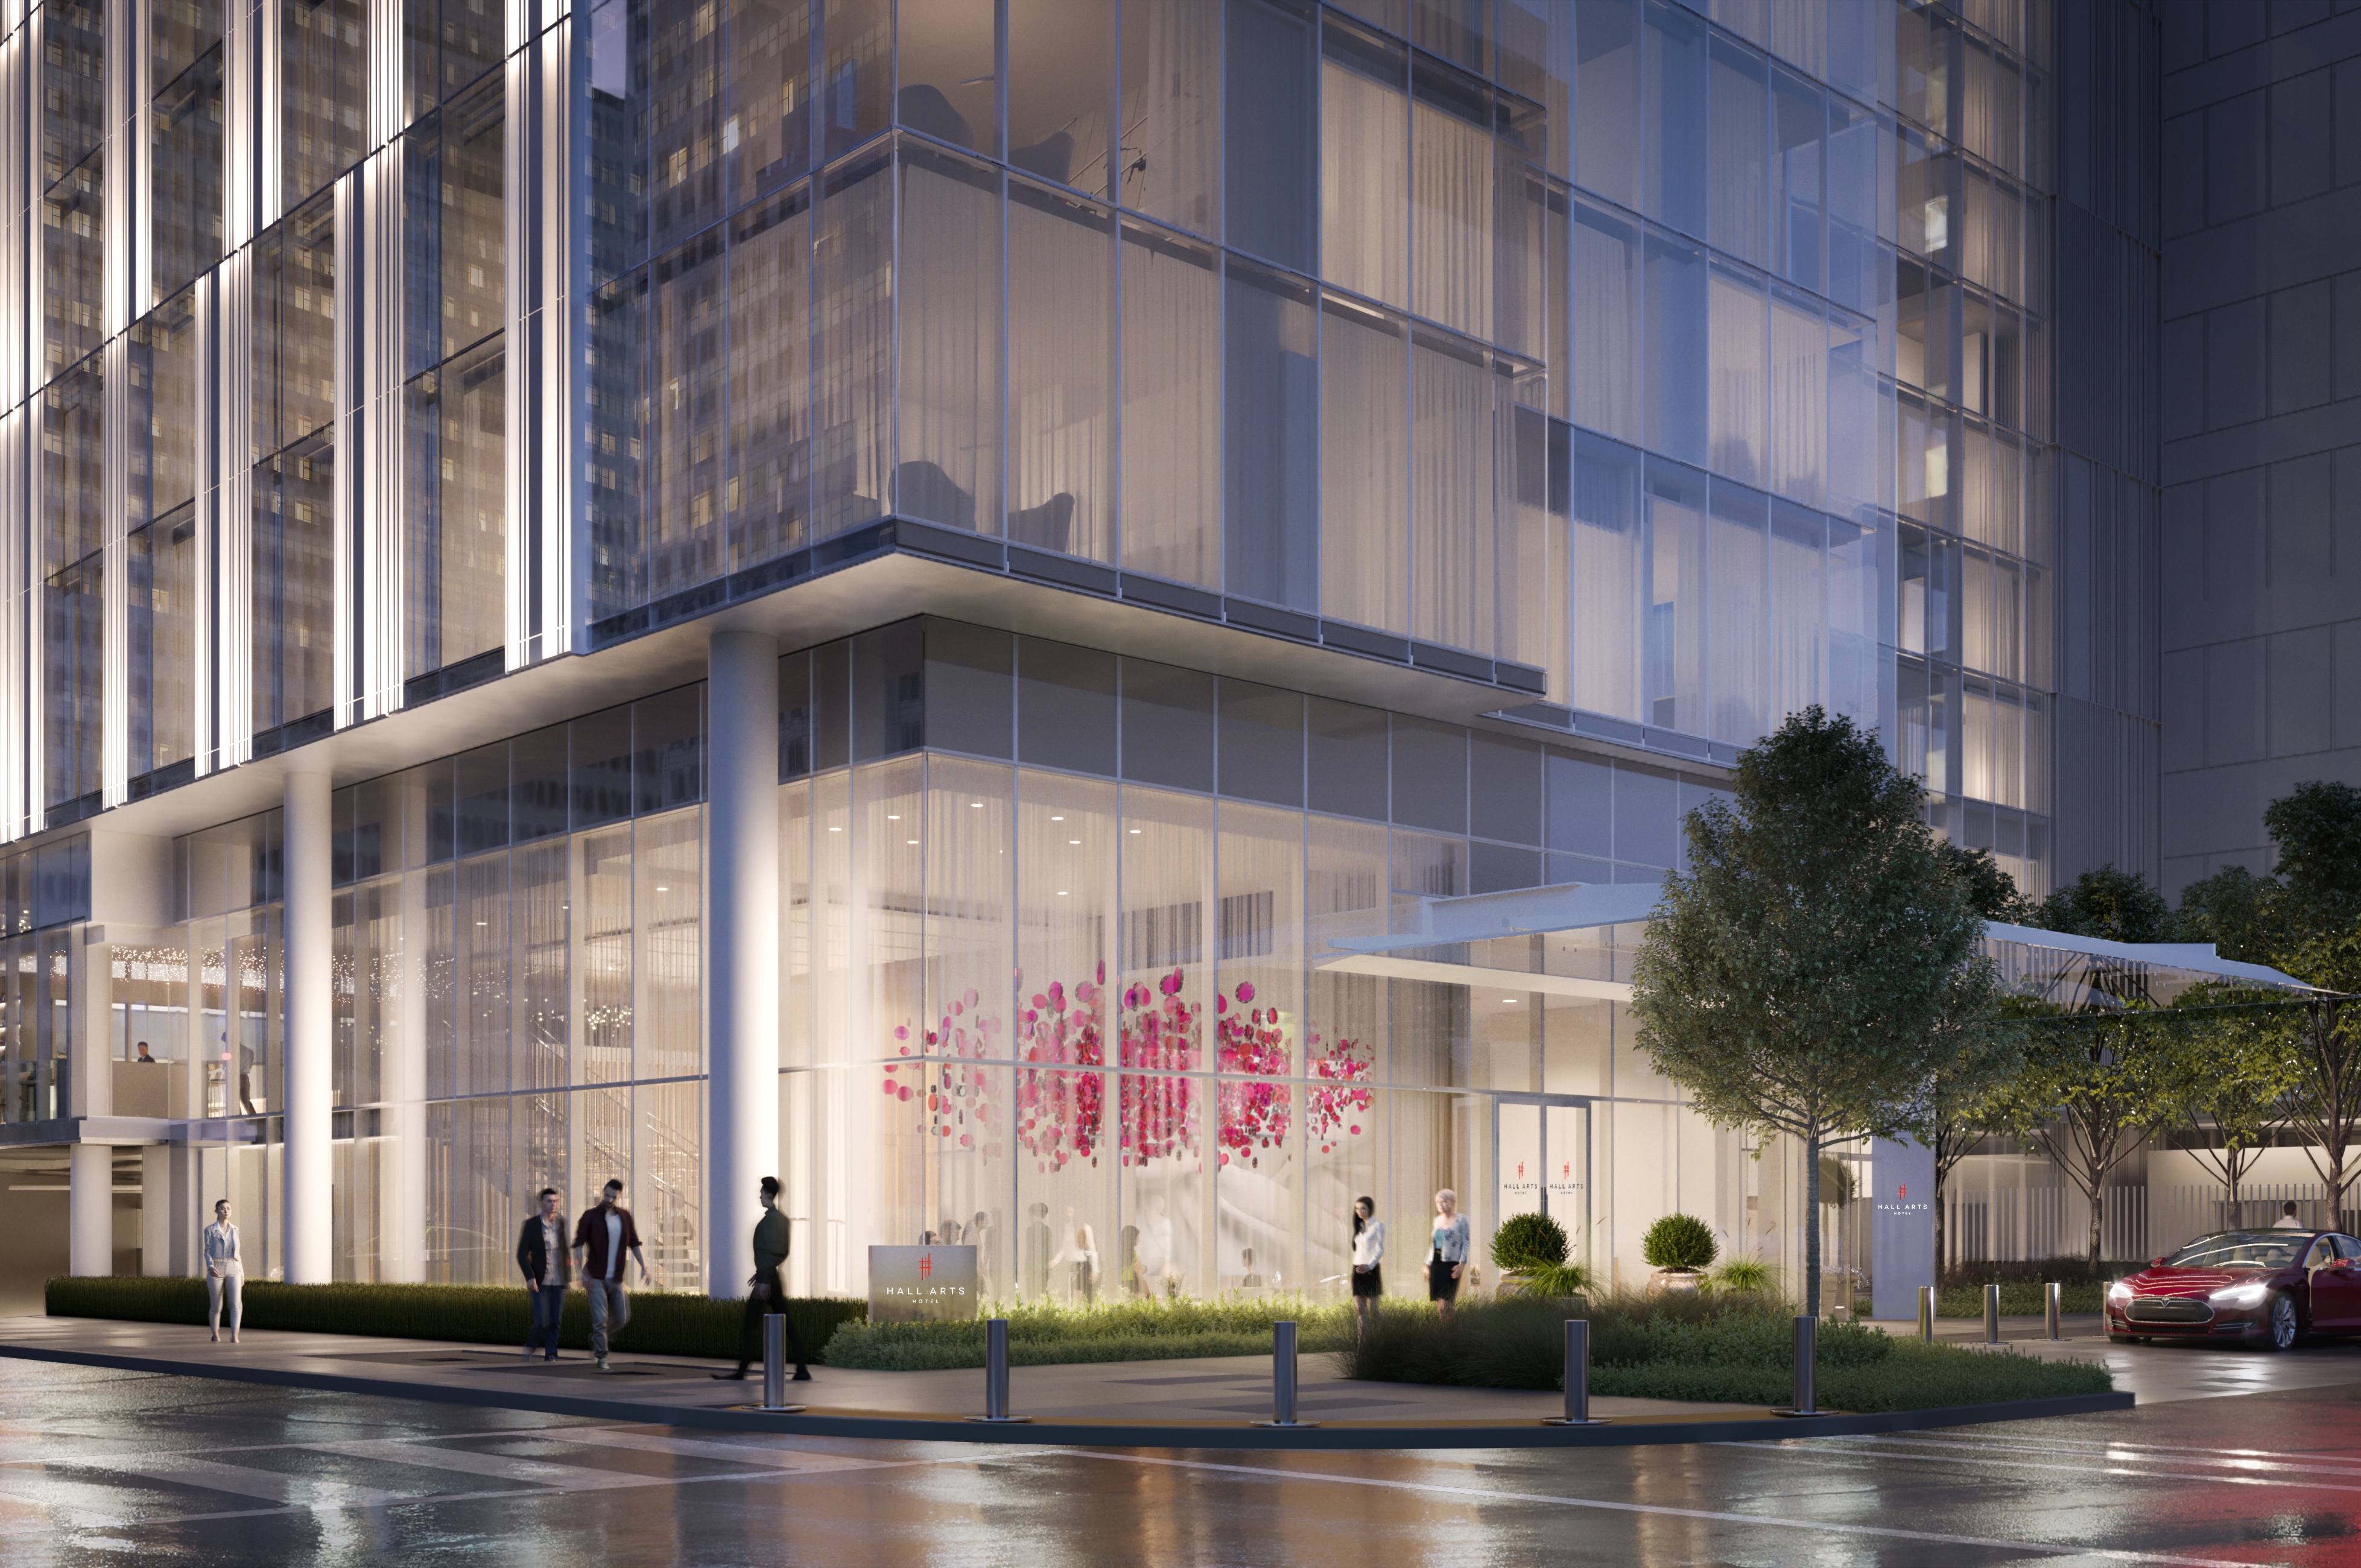 Creativity-Themed Property to Debut in Dallas